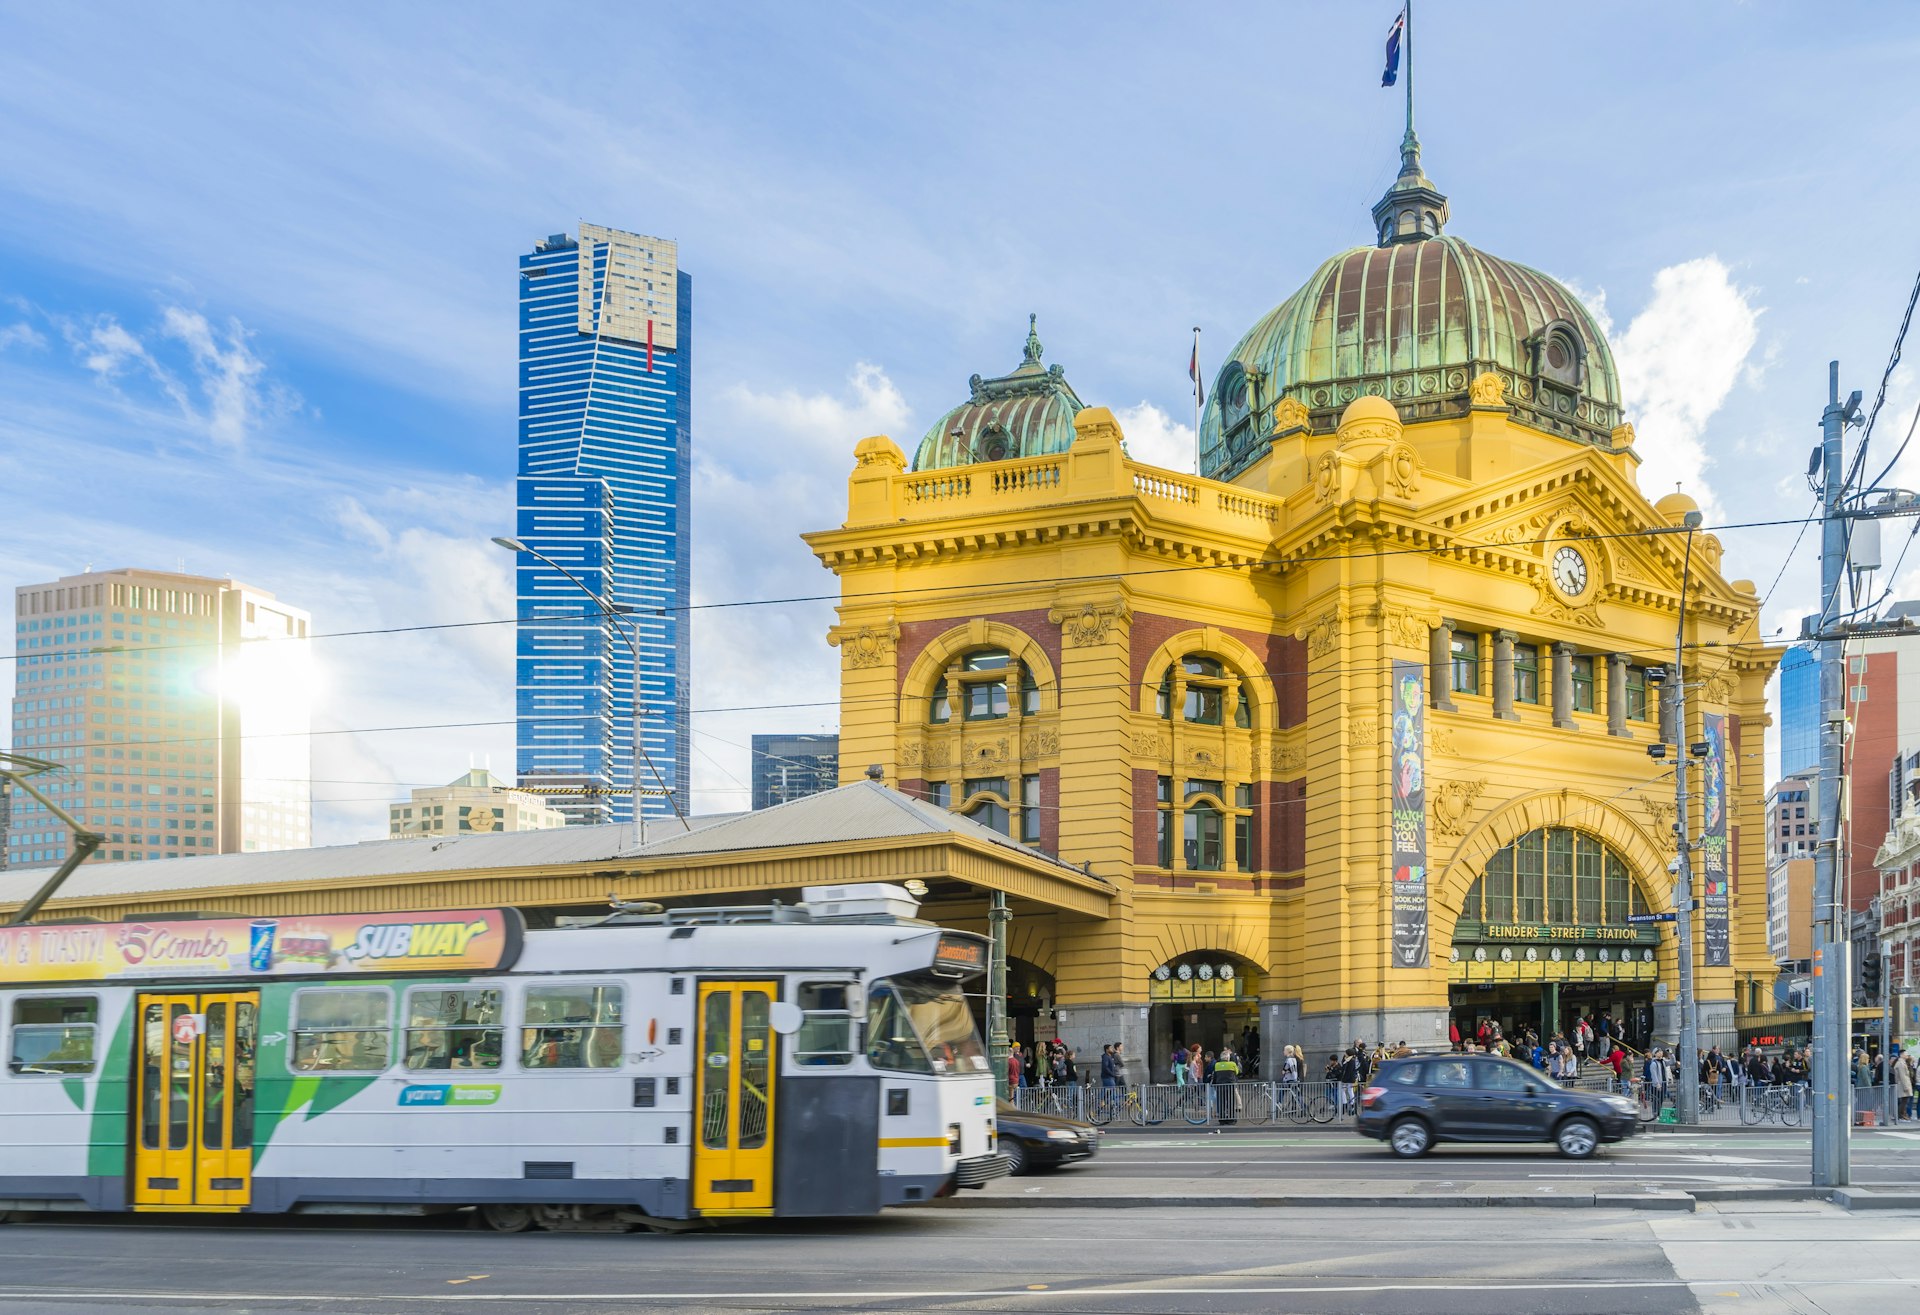  Flinders Street Railway Station in Melbourne with tram, Eureka Tower and other modern buildings near sunset. 